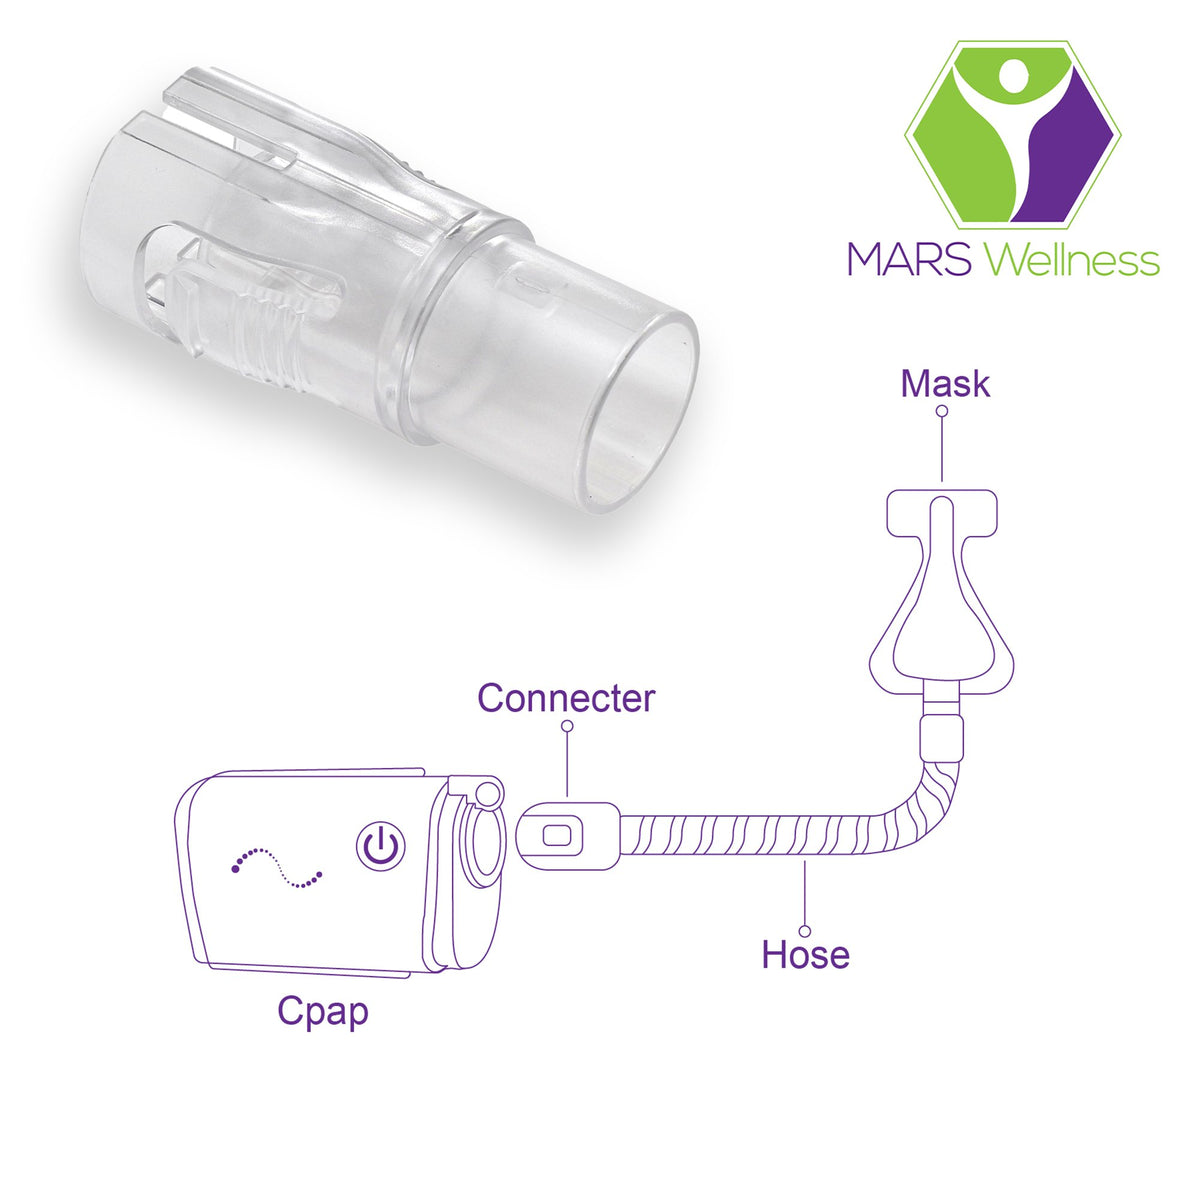 Mars Wellness Airmini Tube Connector Adapter - Tubing and Mask Adapter for Airmini CPAP Machine - Connect Your Tubing, Hoses, and Masks